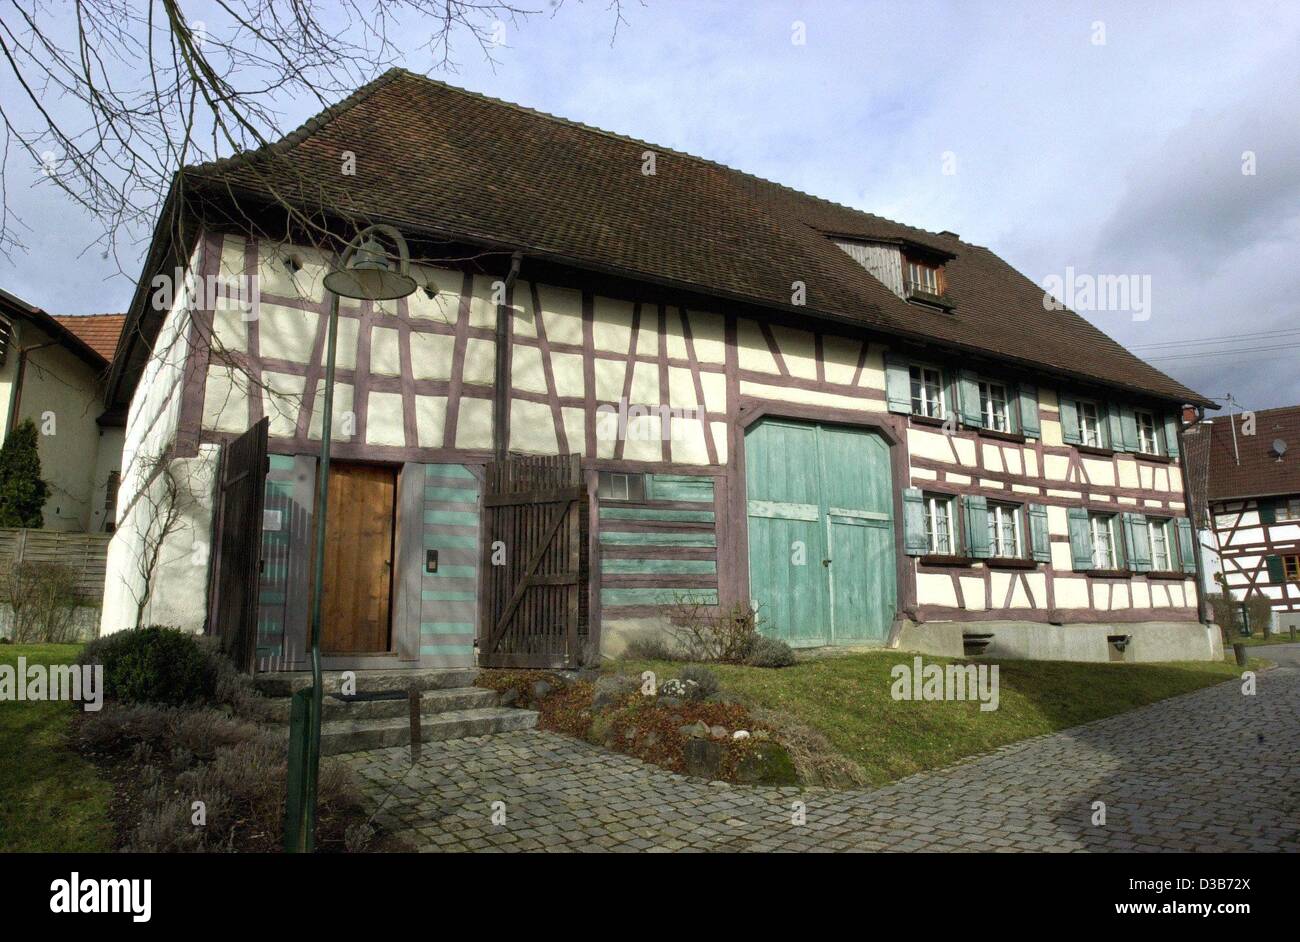 (dpa) - The so-called 'Hesse-House' in Gaienhofen near Lake Constance, Germany, pictured 10 February 2002. German author and Nobel Prize laureate Hermann Hesse and his family lived in the village from 1904 till 1912, spending three years in this house. The half-timbered house was turned into a publi Stock Photo